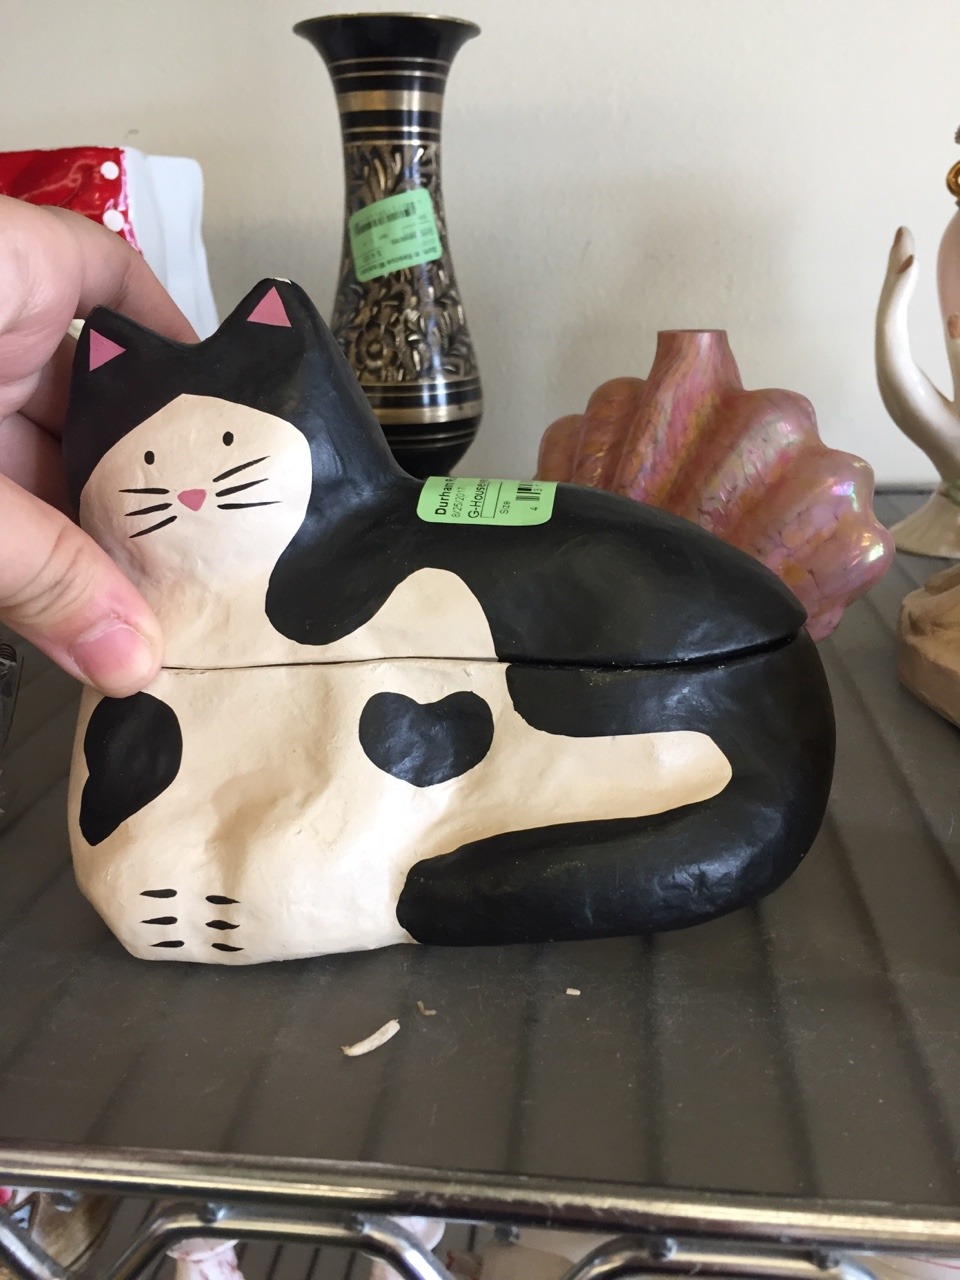 shiftythrifting:  A cat box with a smaller cat inside it. I expected nesting cats